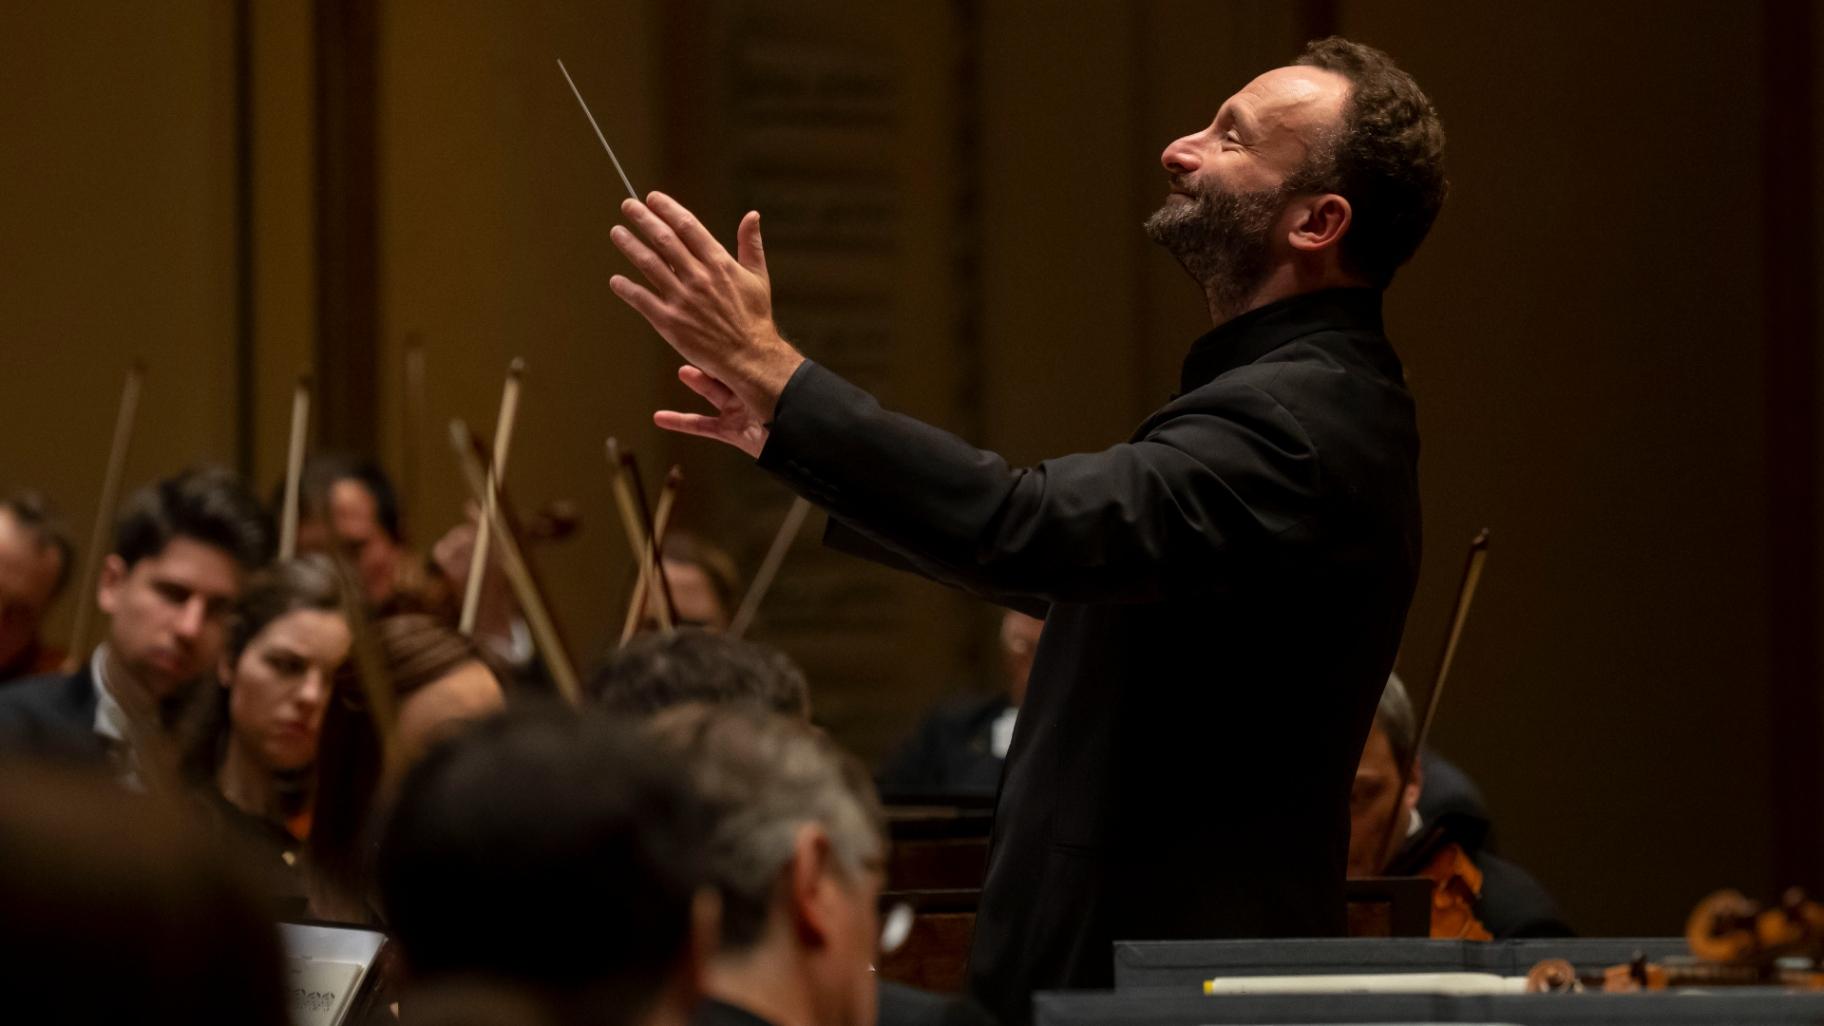 Chief Conductor Kirill Petrenko conducts the Berlin Philharmoniker at Chicago’s Orchestra Hall on Nov. 16, 2022. (Credit: Todd Rosenberg Photography)